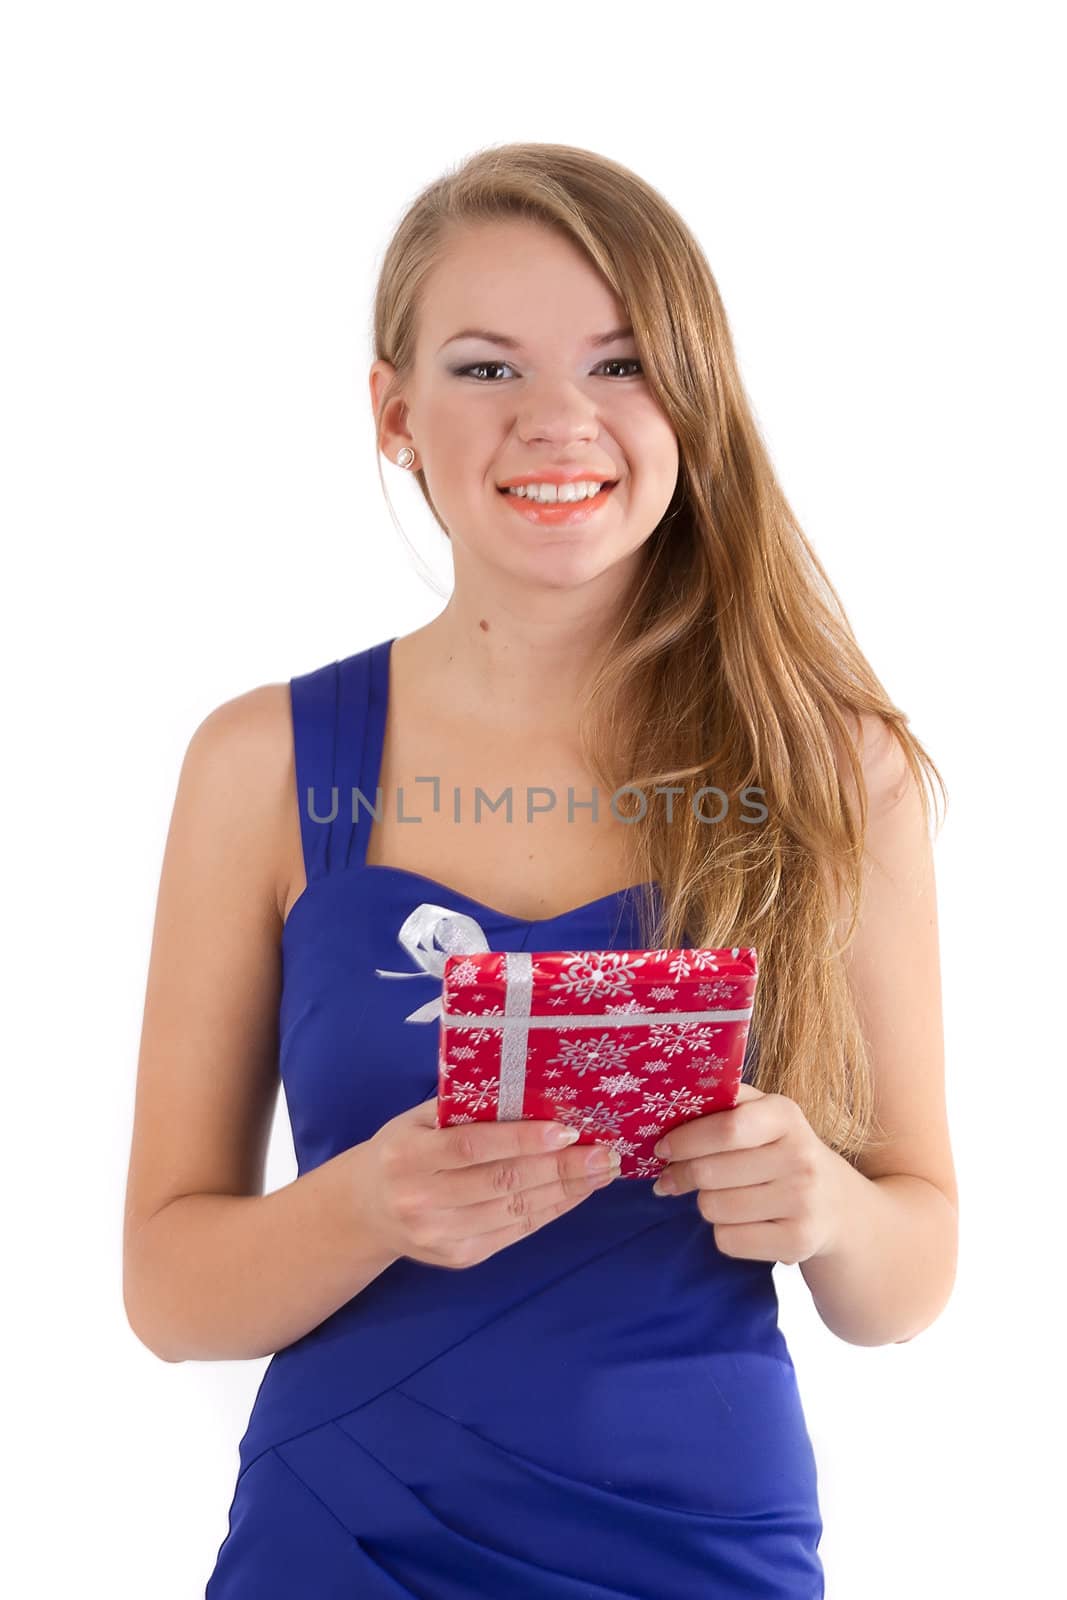 The smiling girl in a blue dress with long hair with a Christmas gift in hands